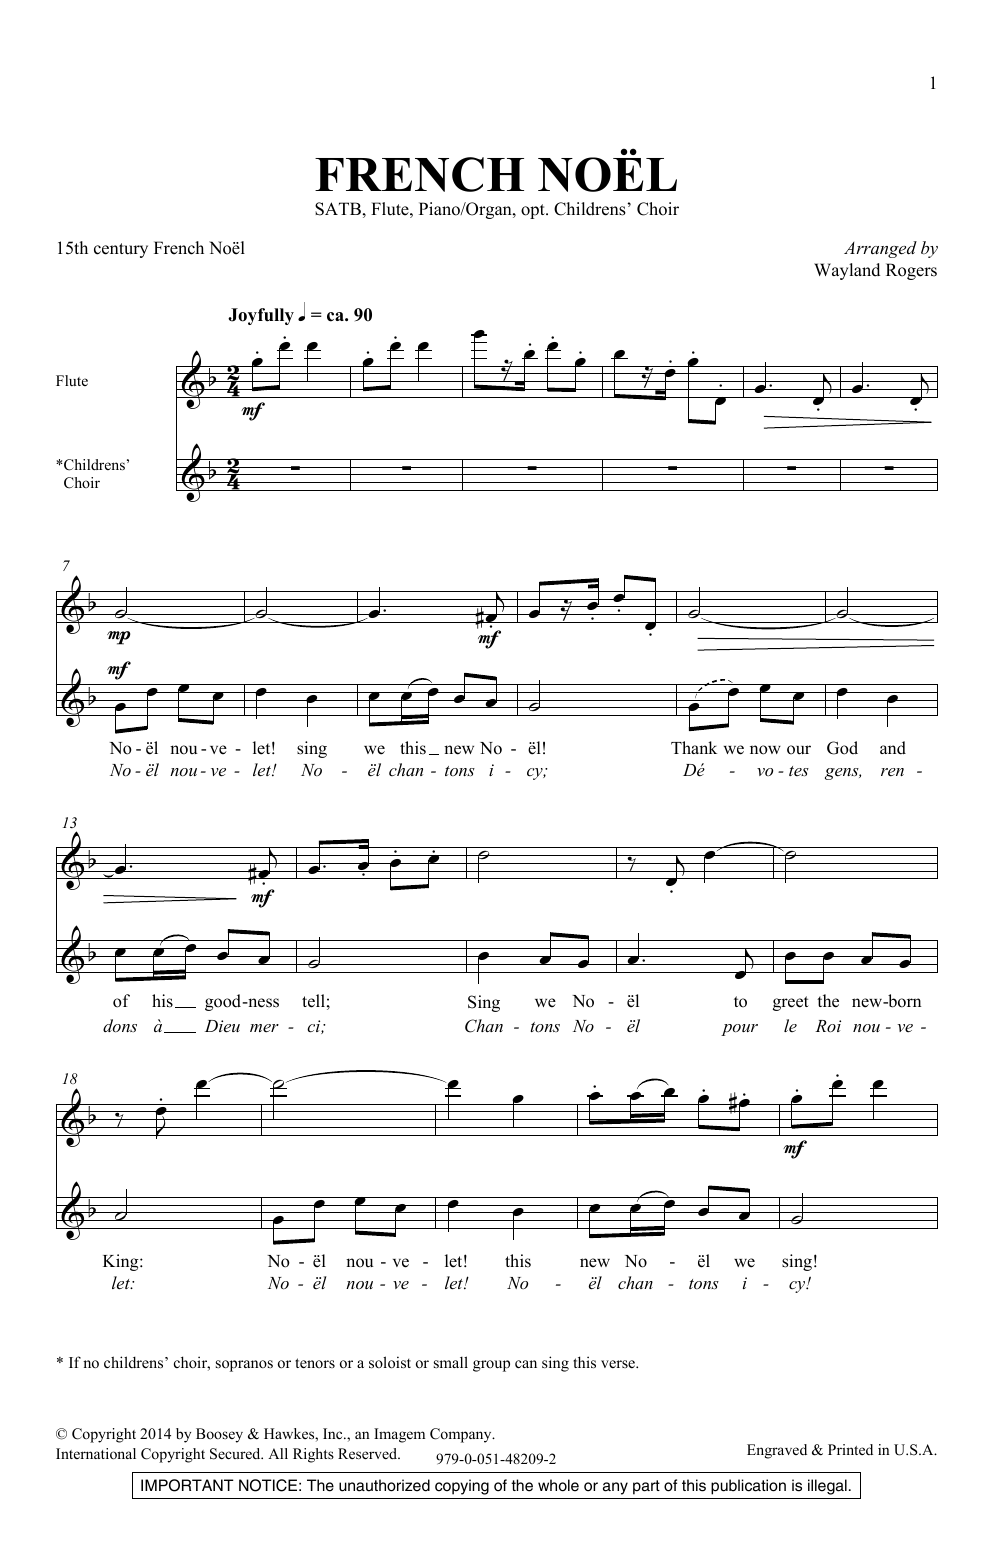 Download Wayland Rogers French Noel Sheet Music